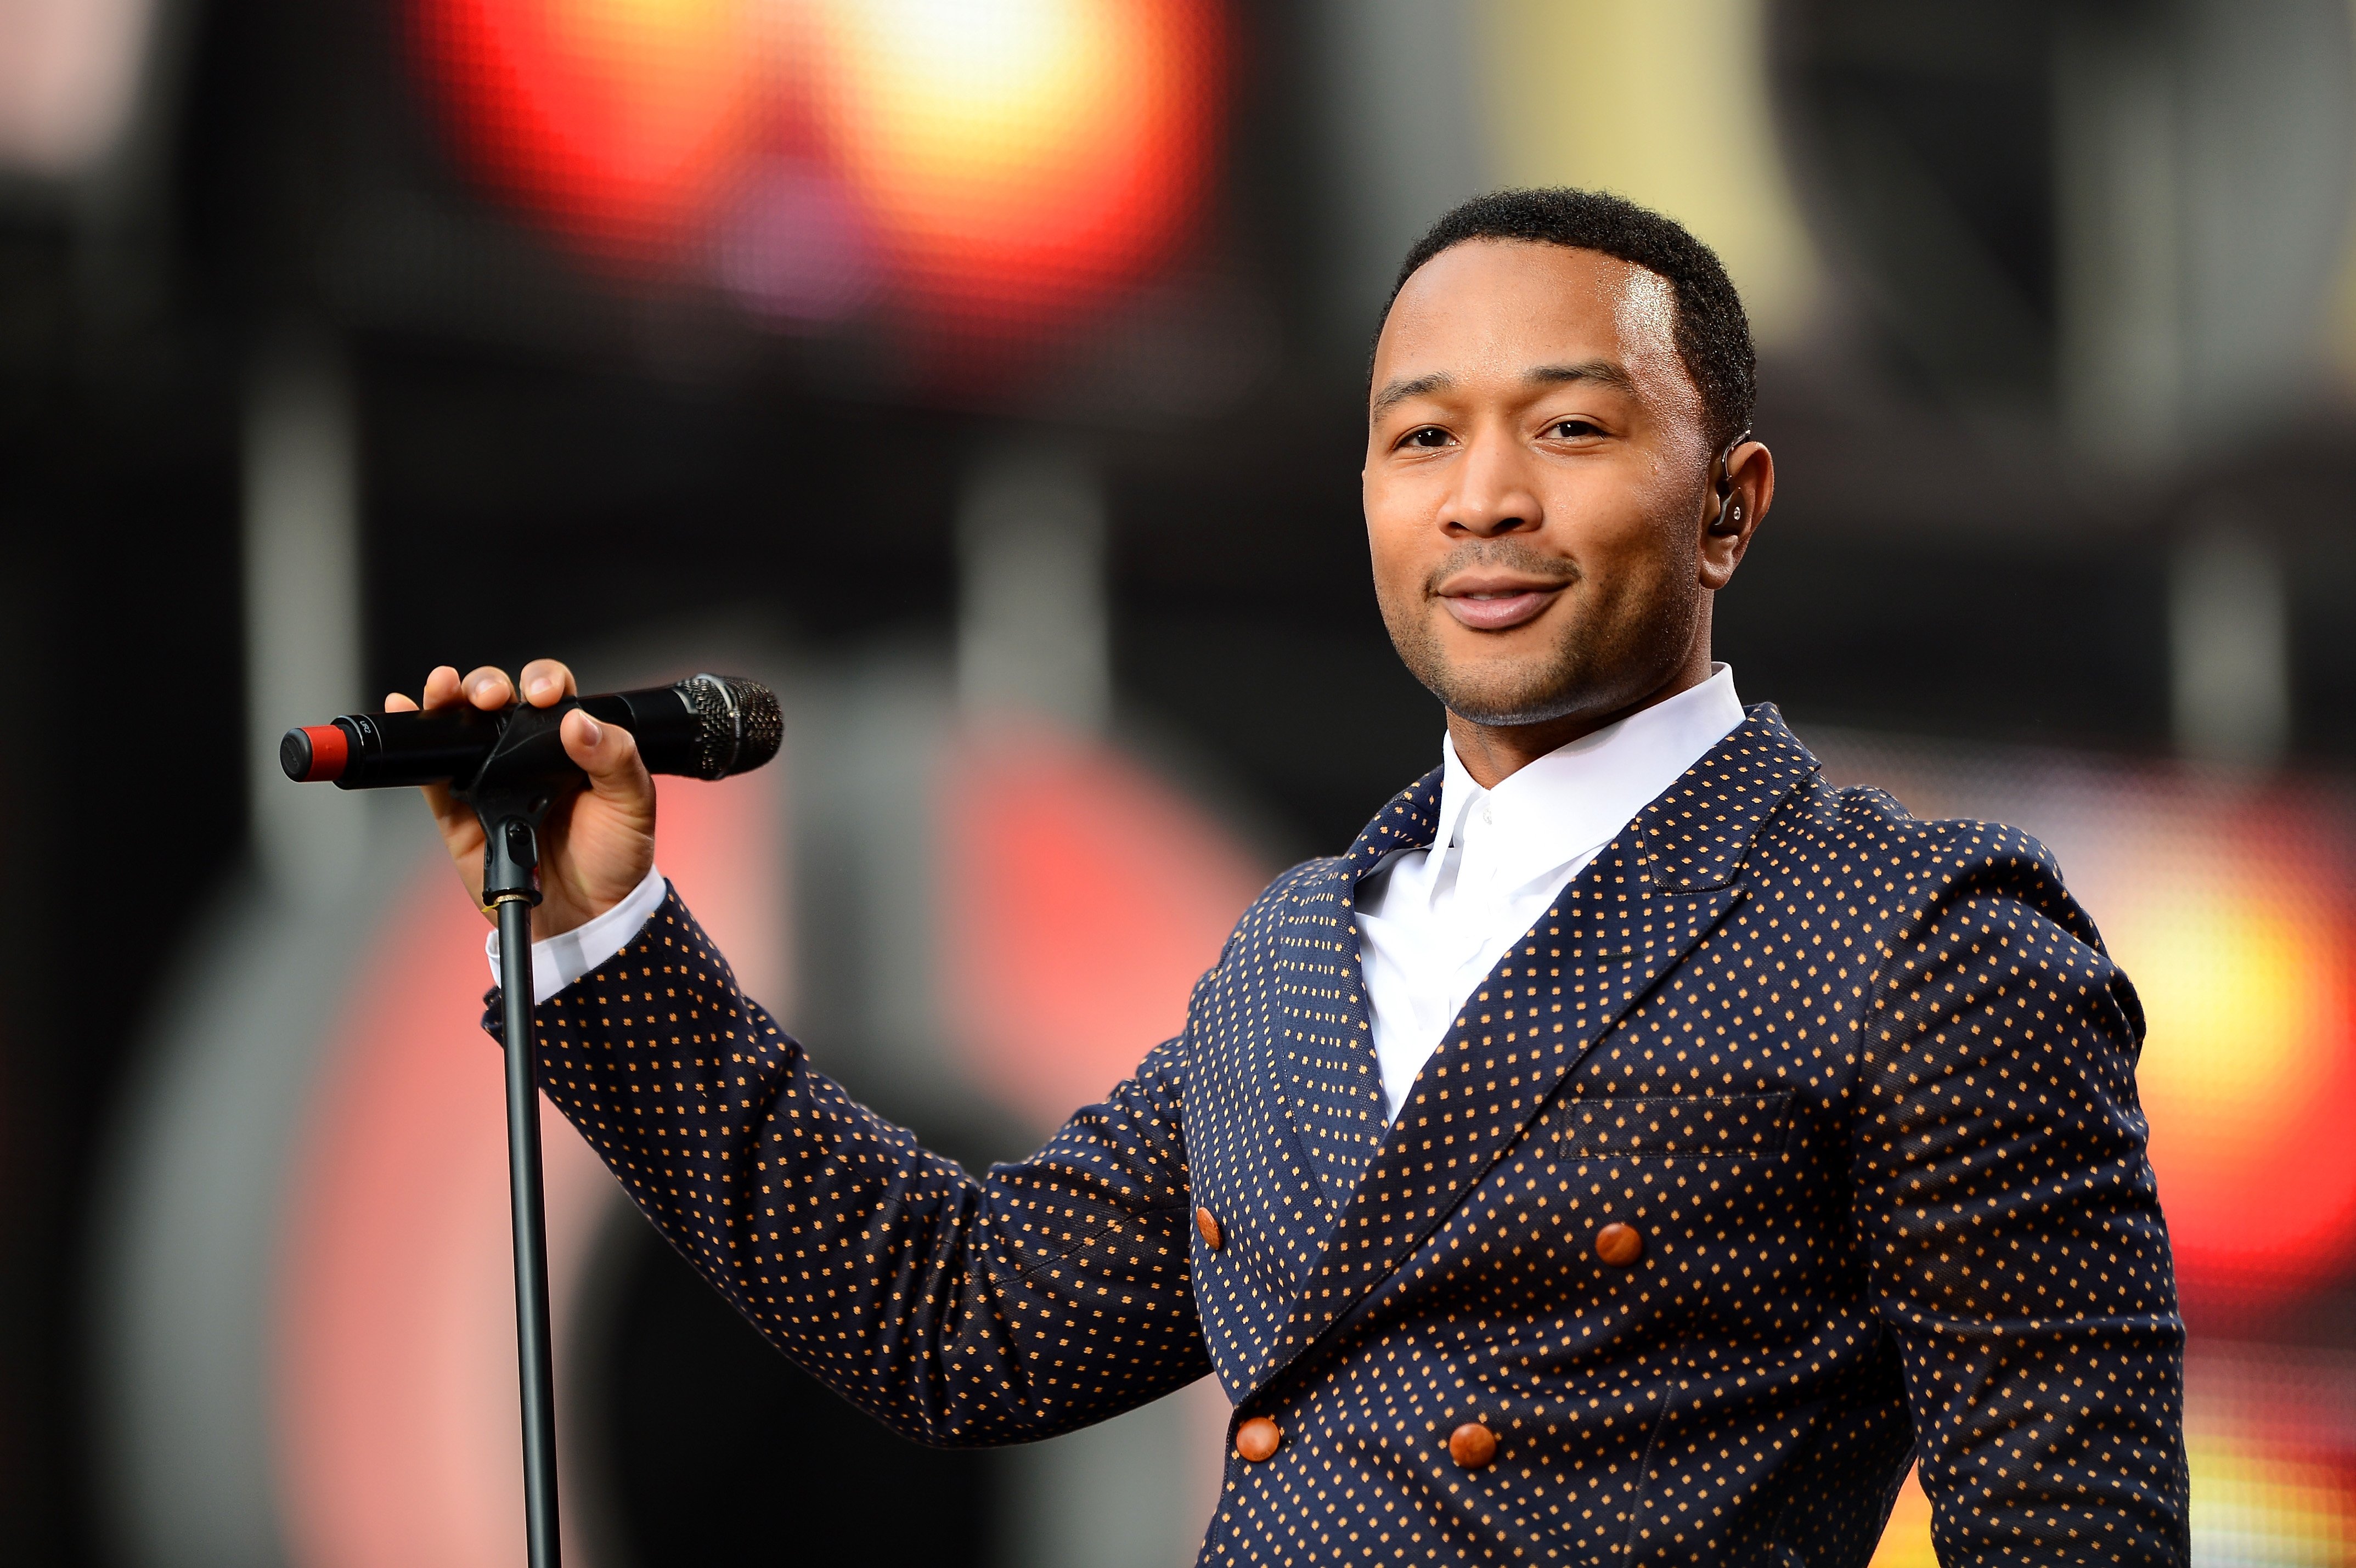 John Legend performing at the "Chime For Change: The Sound Of Change Live" Concert on June 1, 2013 in London, England. | Source: Getty Images